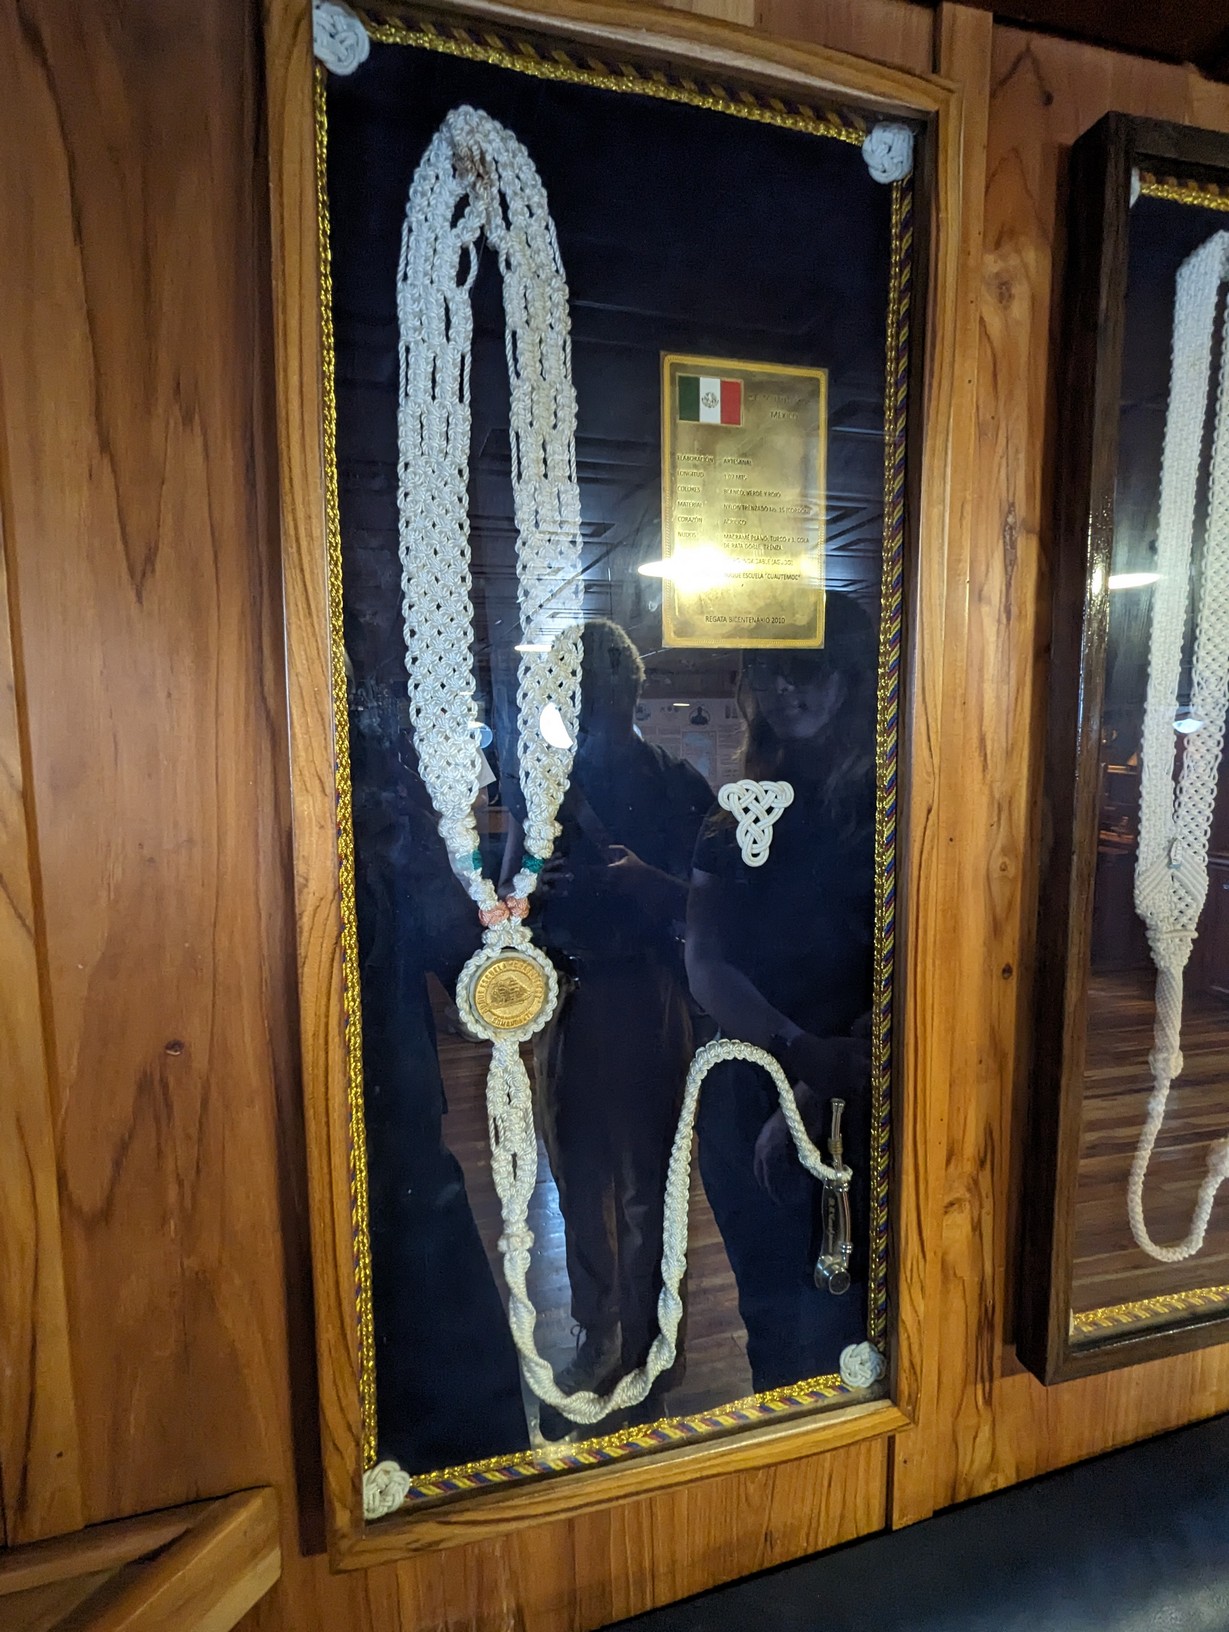 A boatswain's whistle on an elaborately braided rope lanyard.